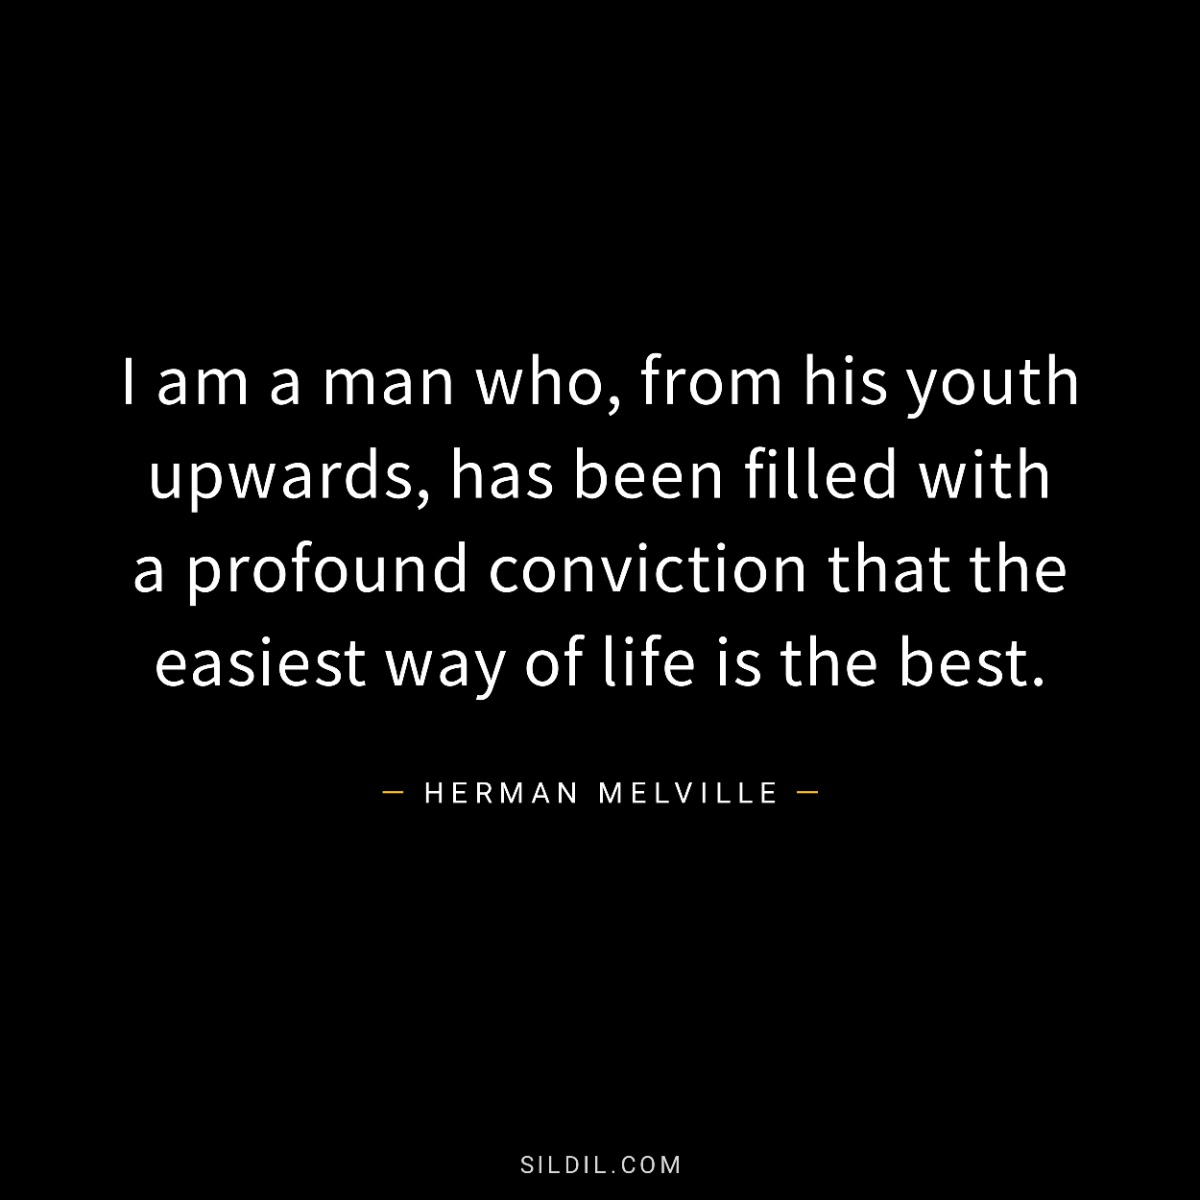 I am a man who, from his youth upwards, has been filled with a profound conviction that the easiest way of life is the best.